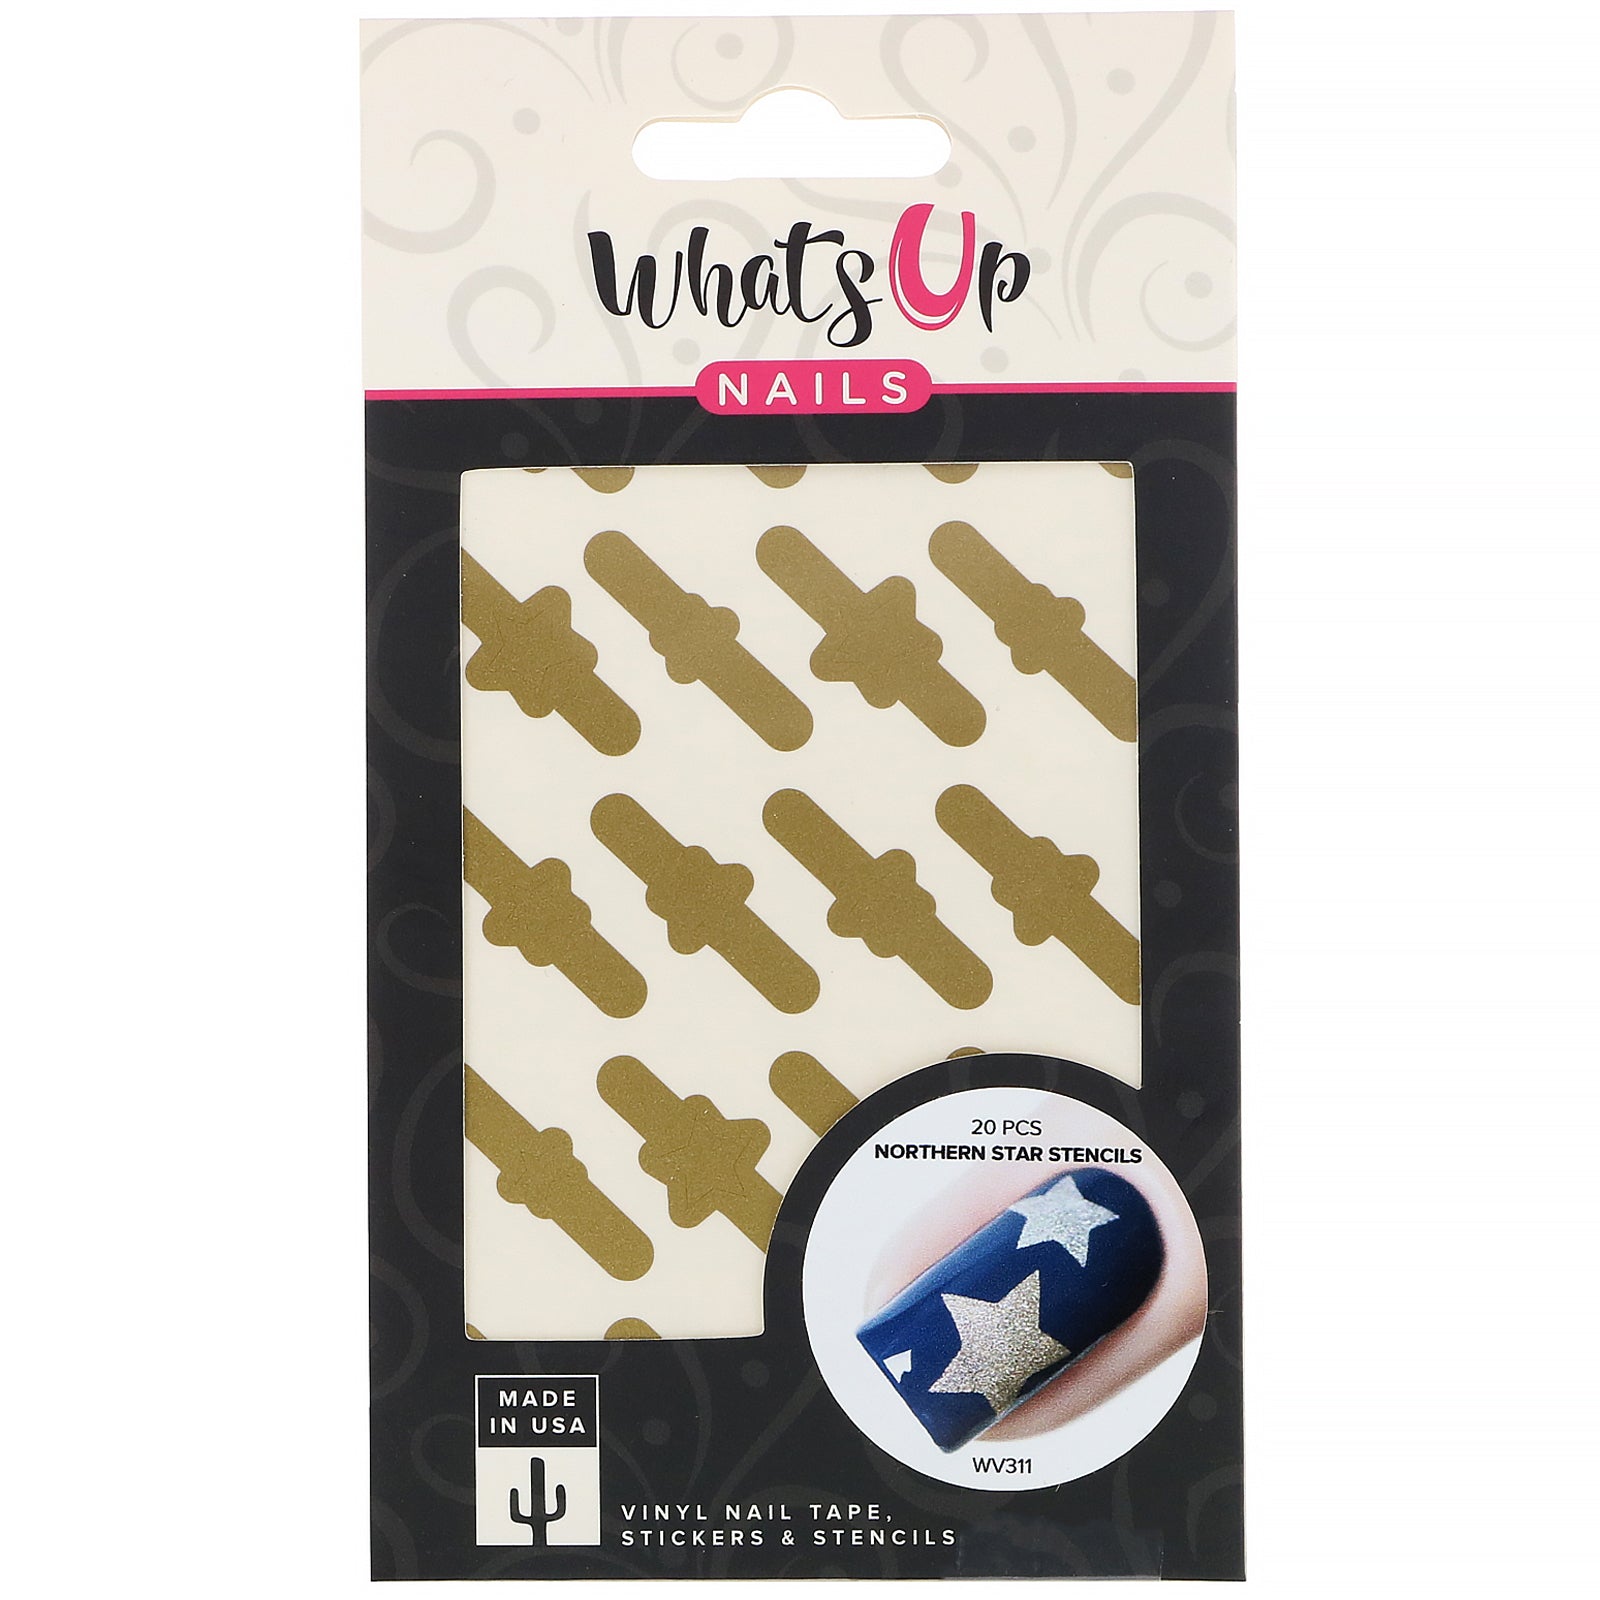 Whats Up Nails, Northern Star Stencils,  20 Pieces